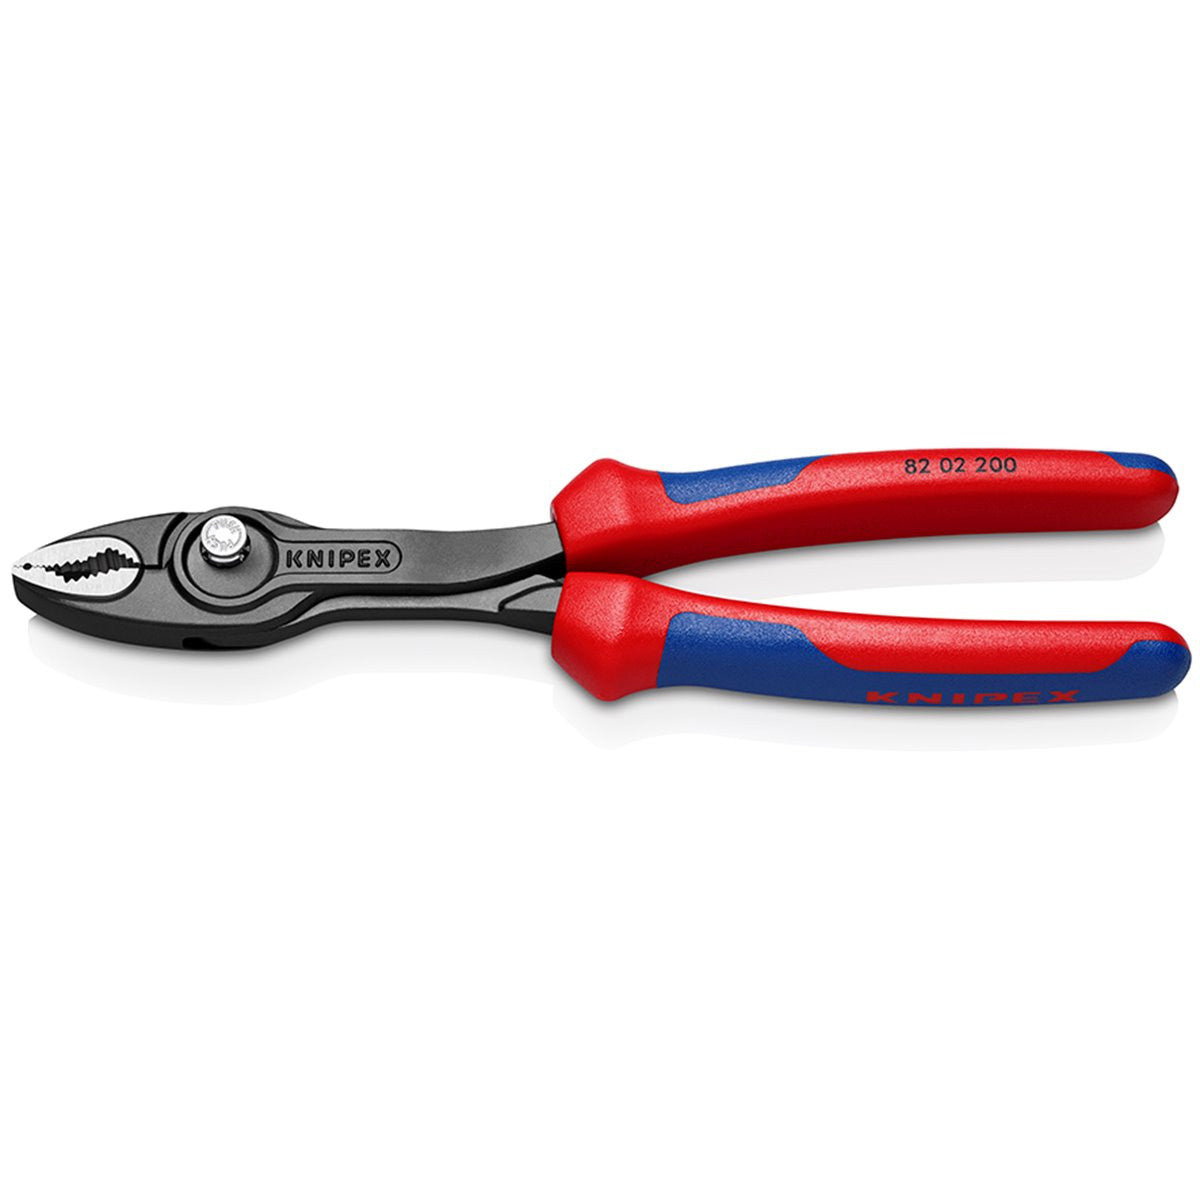 Knipex 8202200 TwinGrip Slip Joint Pliers 200mm